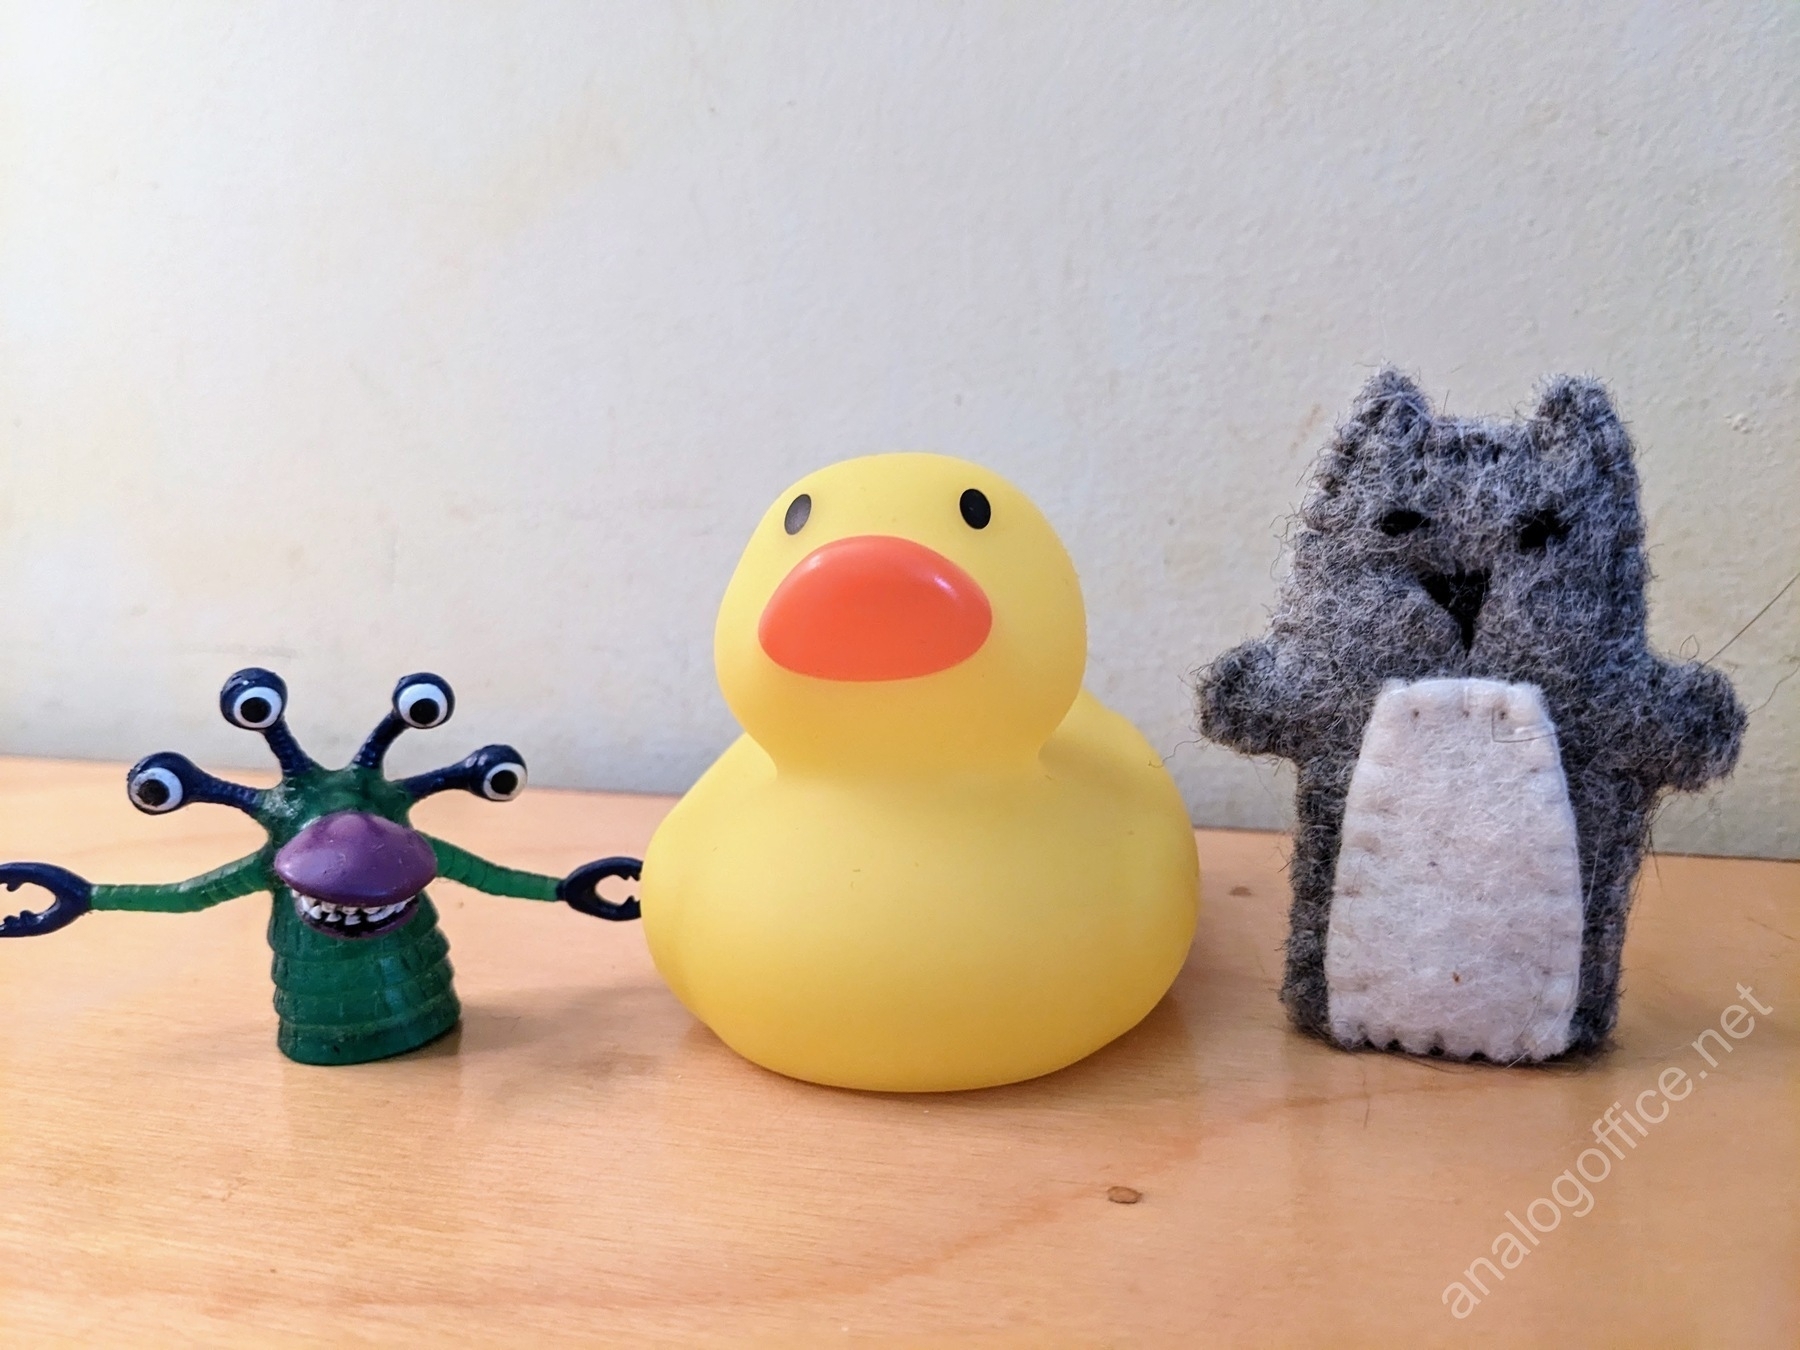 rubber duck bath toy next to a monster finger puppet and a cat finger puppet